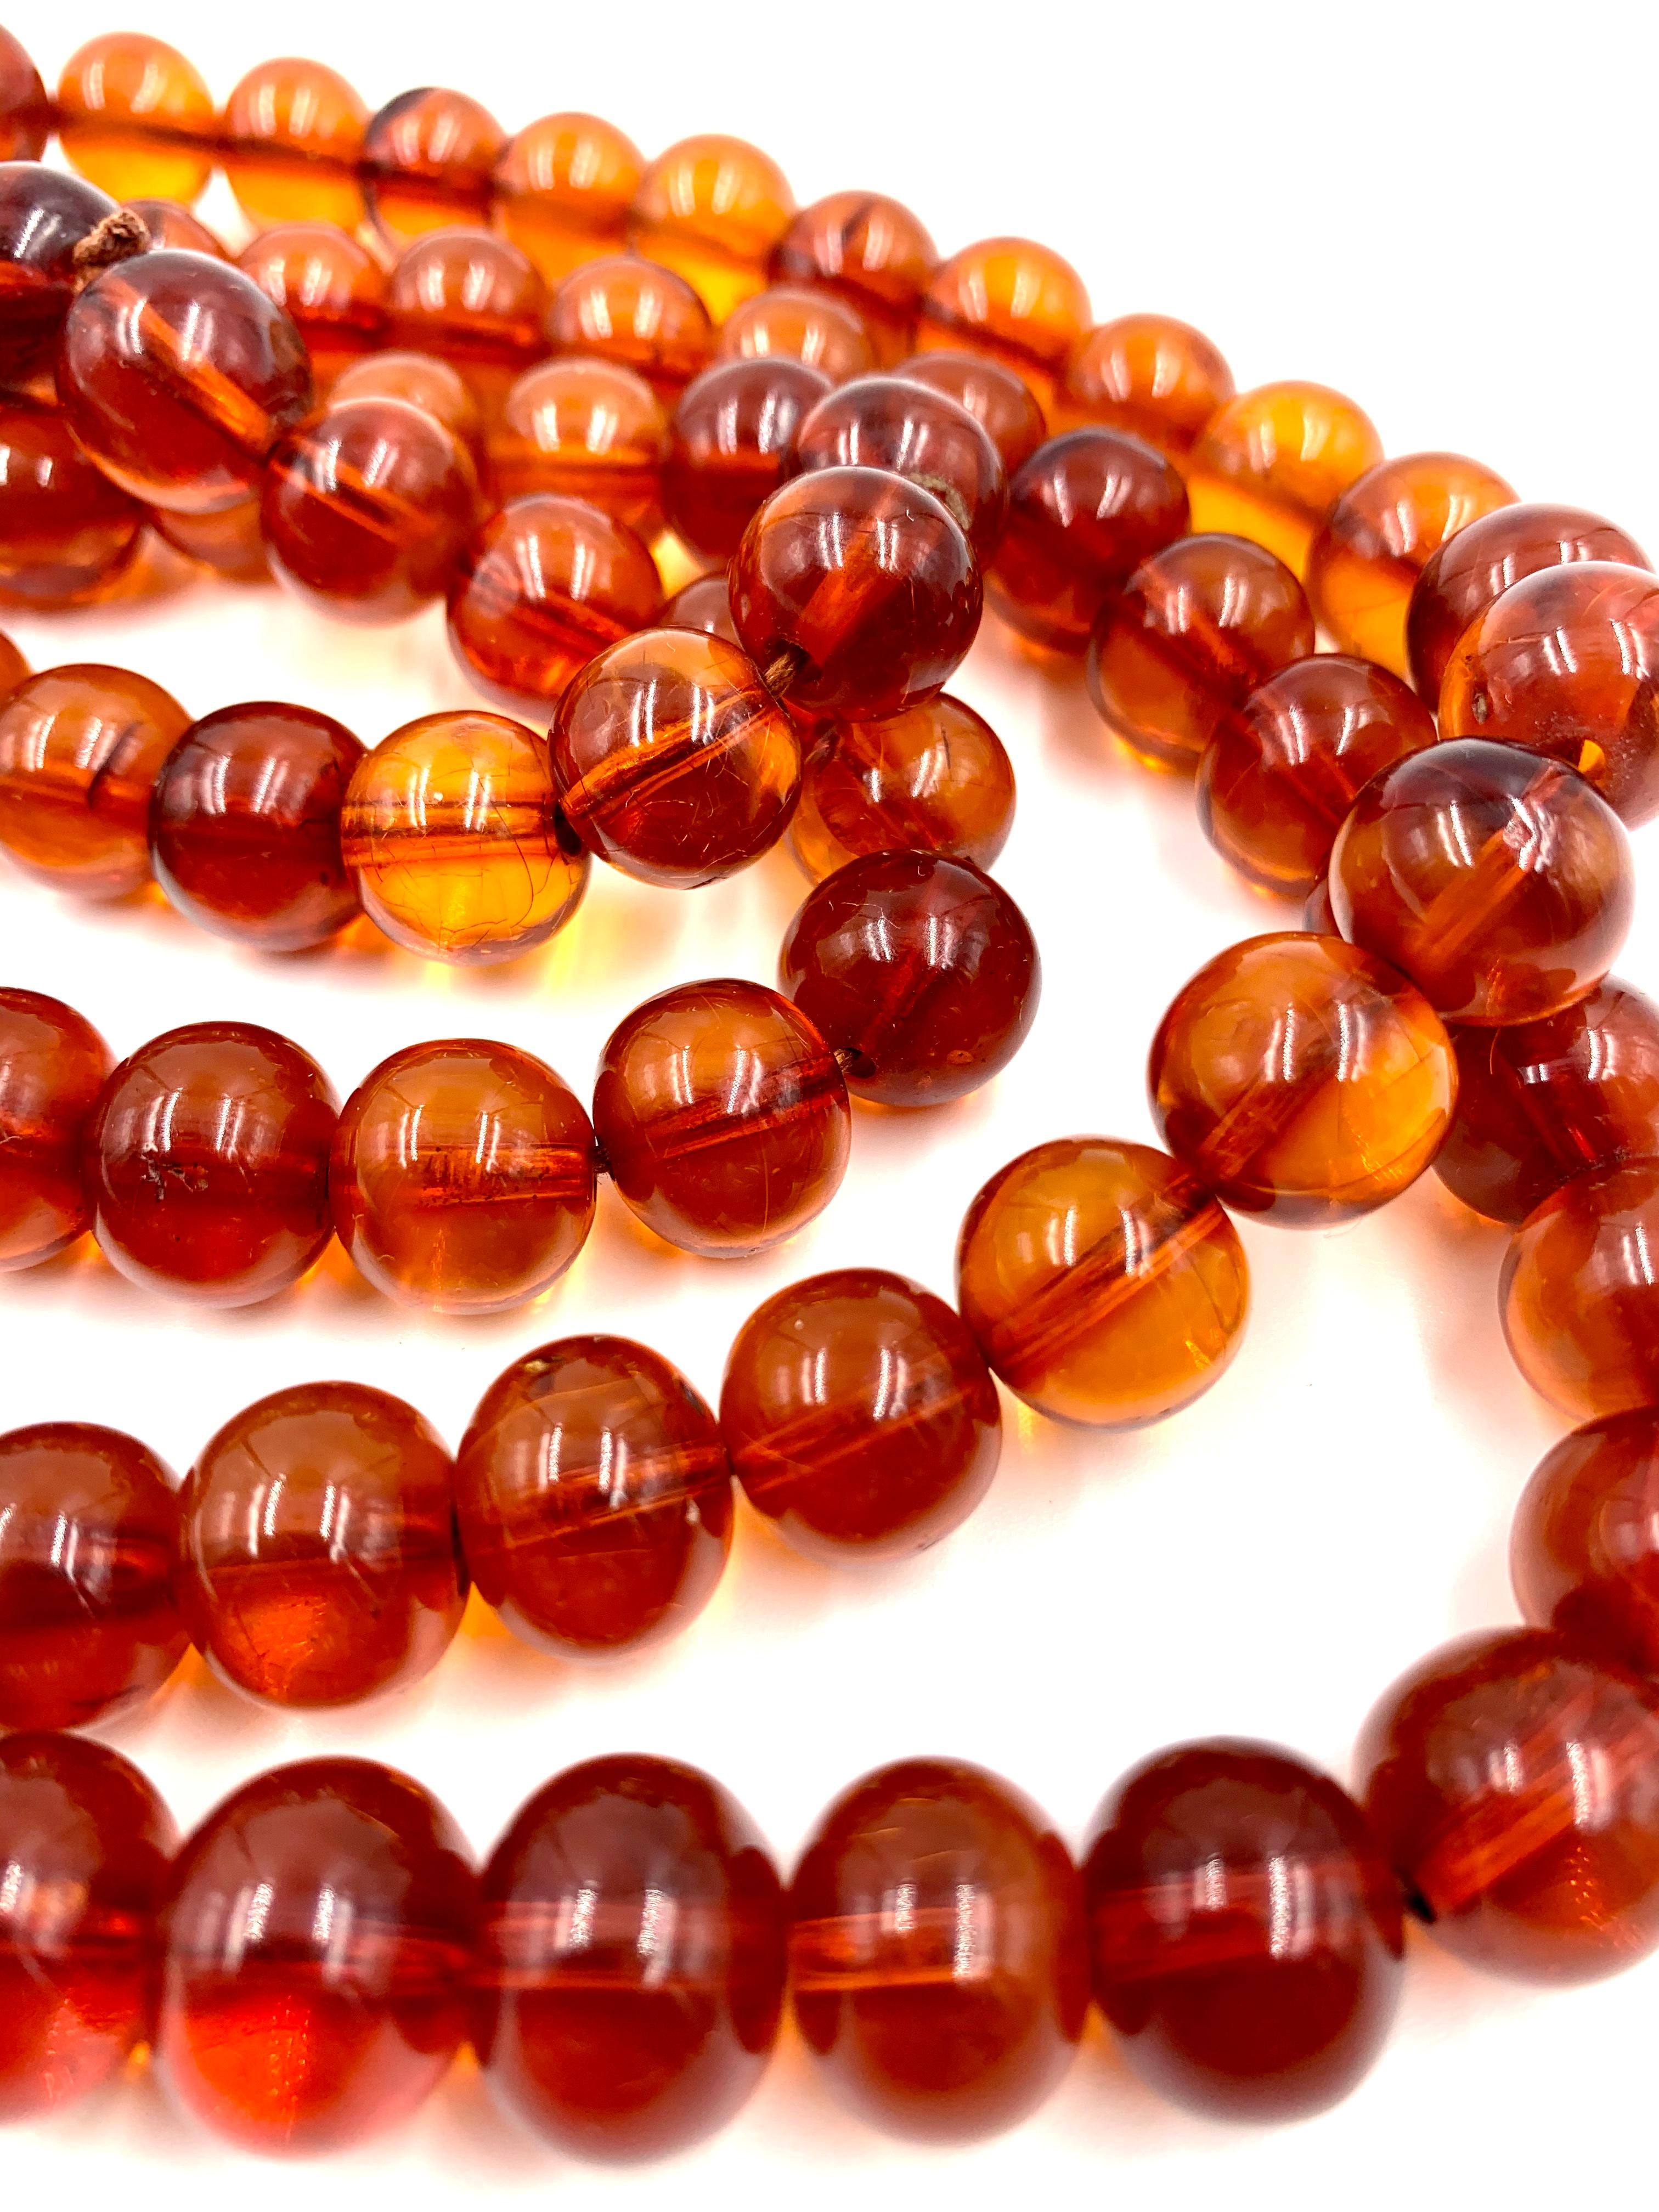 Composed of 108 round golden honey colored 12-13mm amber beads, gem quality, translucent with few inclusions, showing excellent crazing indicating good age. Sometimes referred to as Mandarin chain or official court beads, these types of necklaces